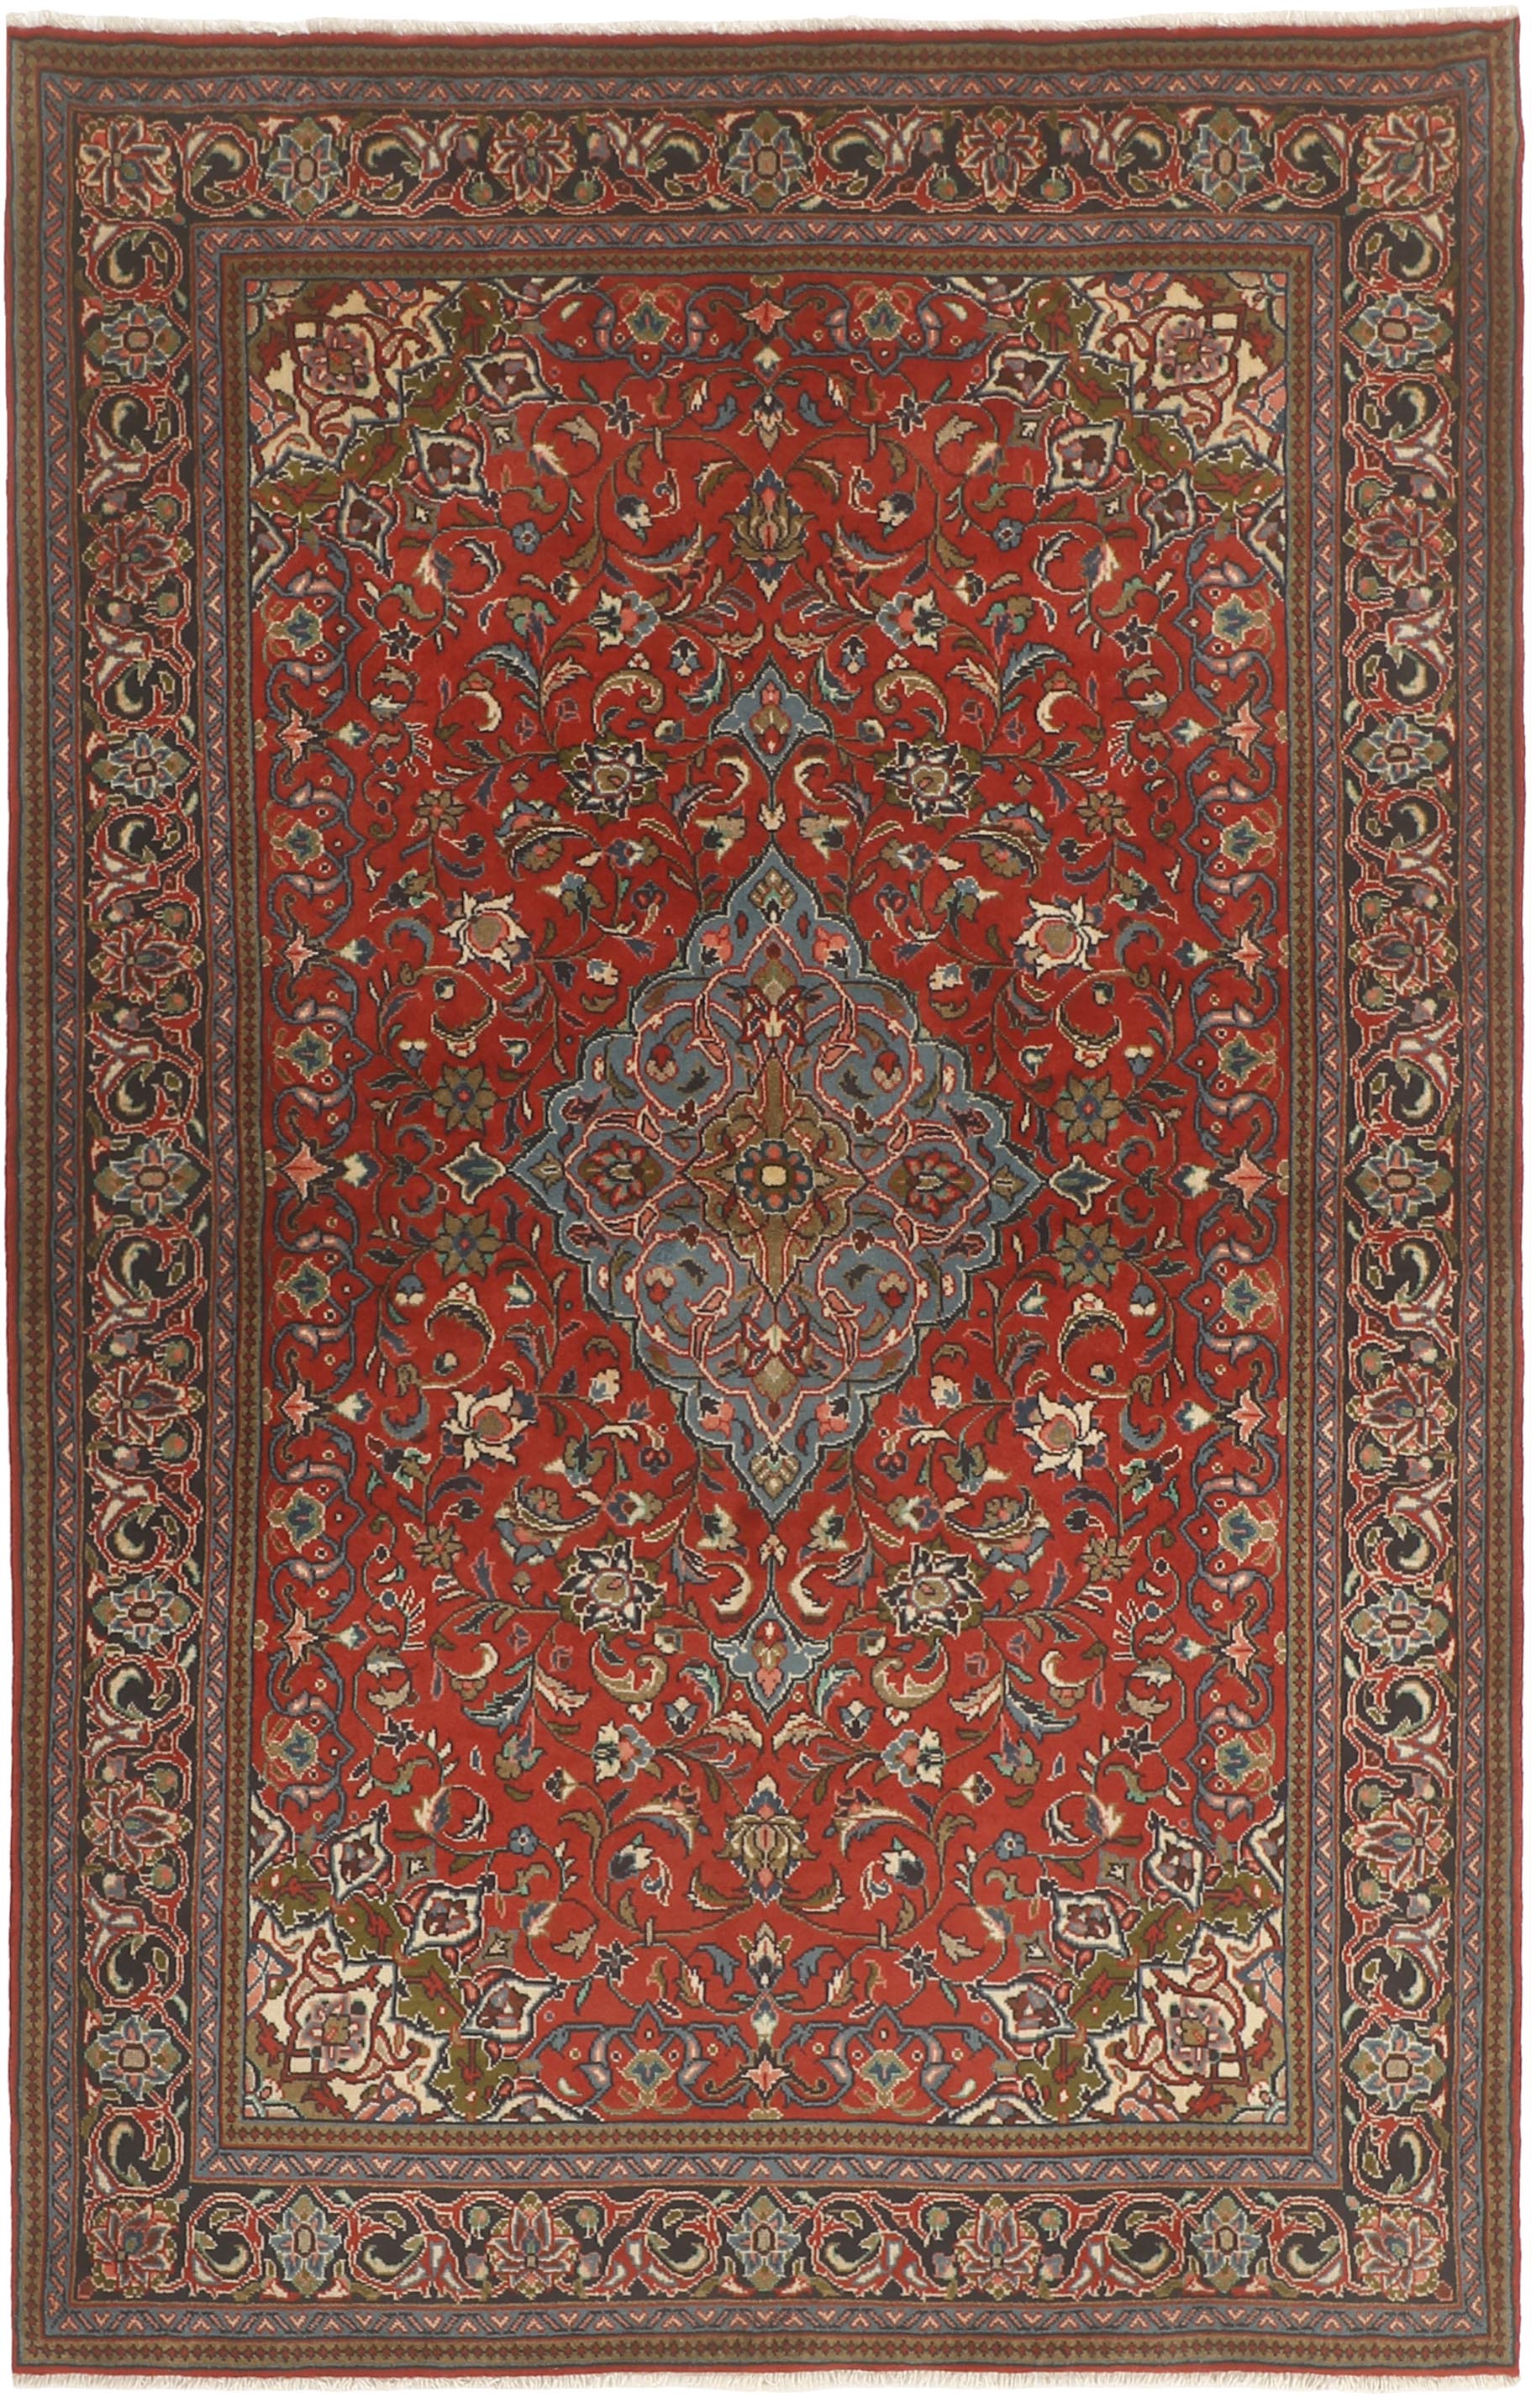 Authentic persian rug with traditional floral design in red, blue and cream